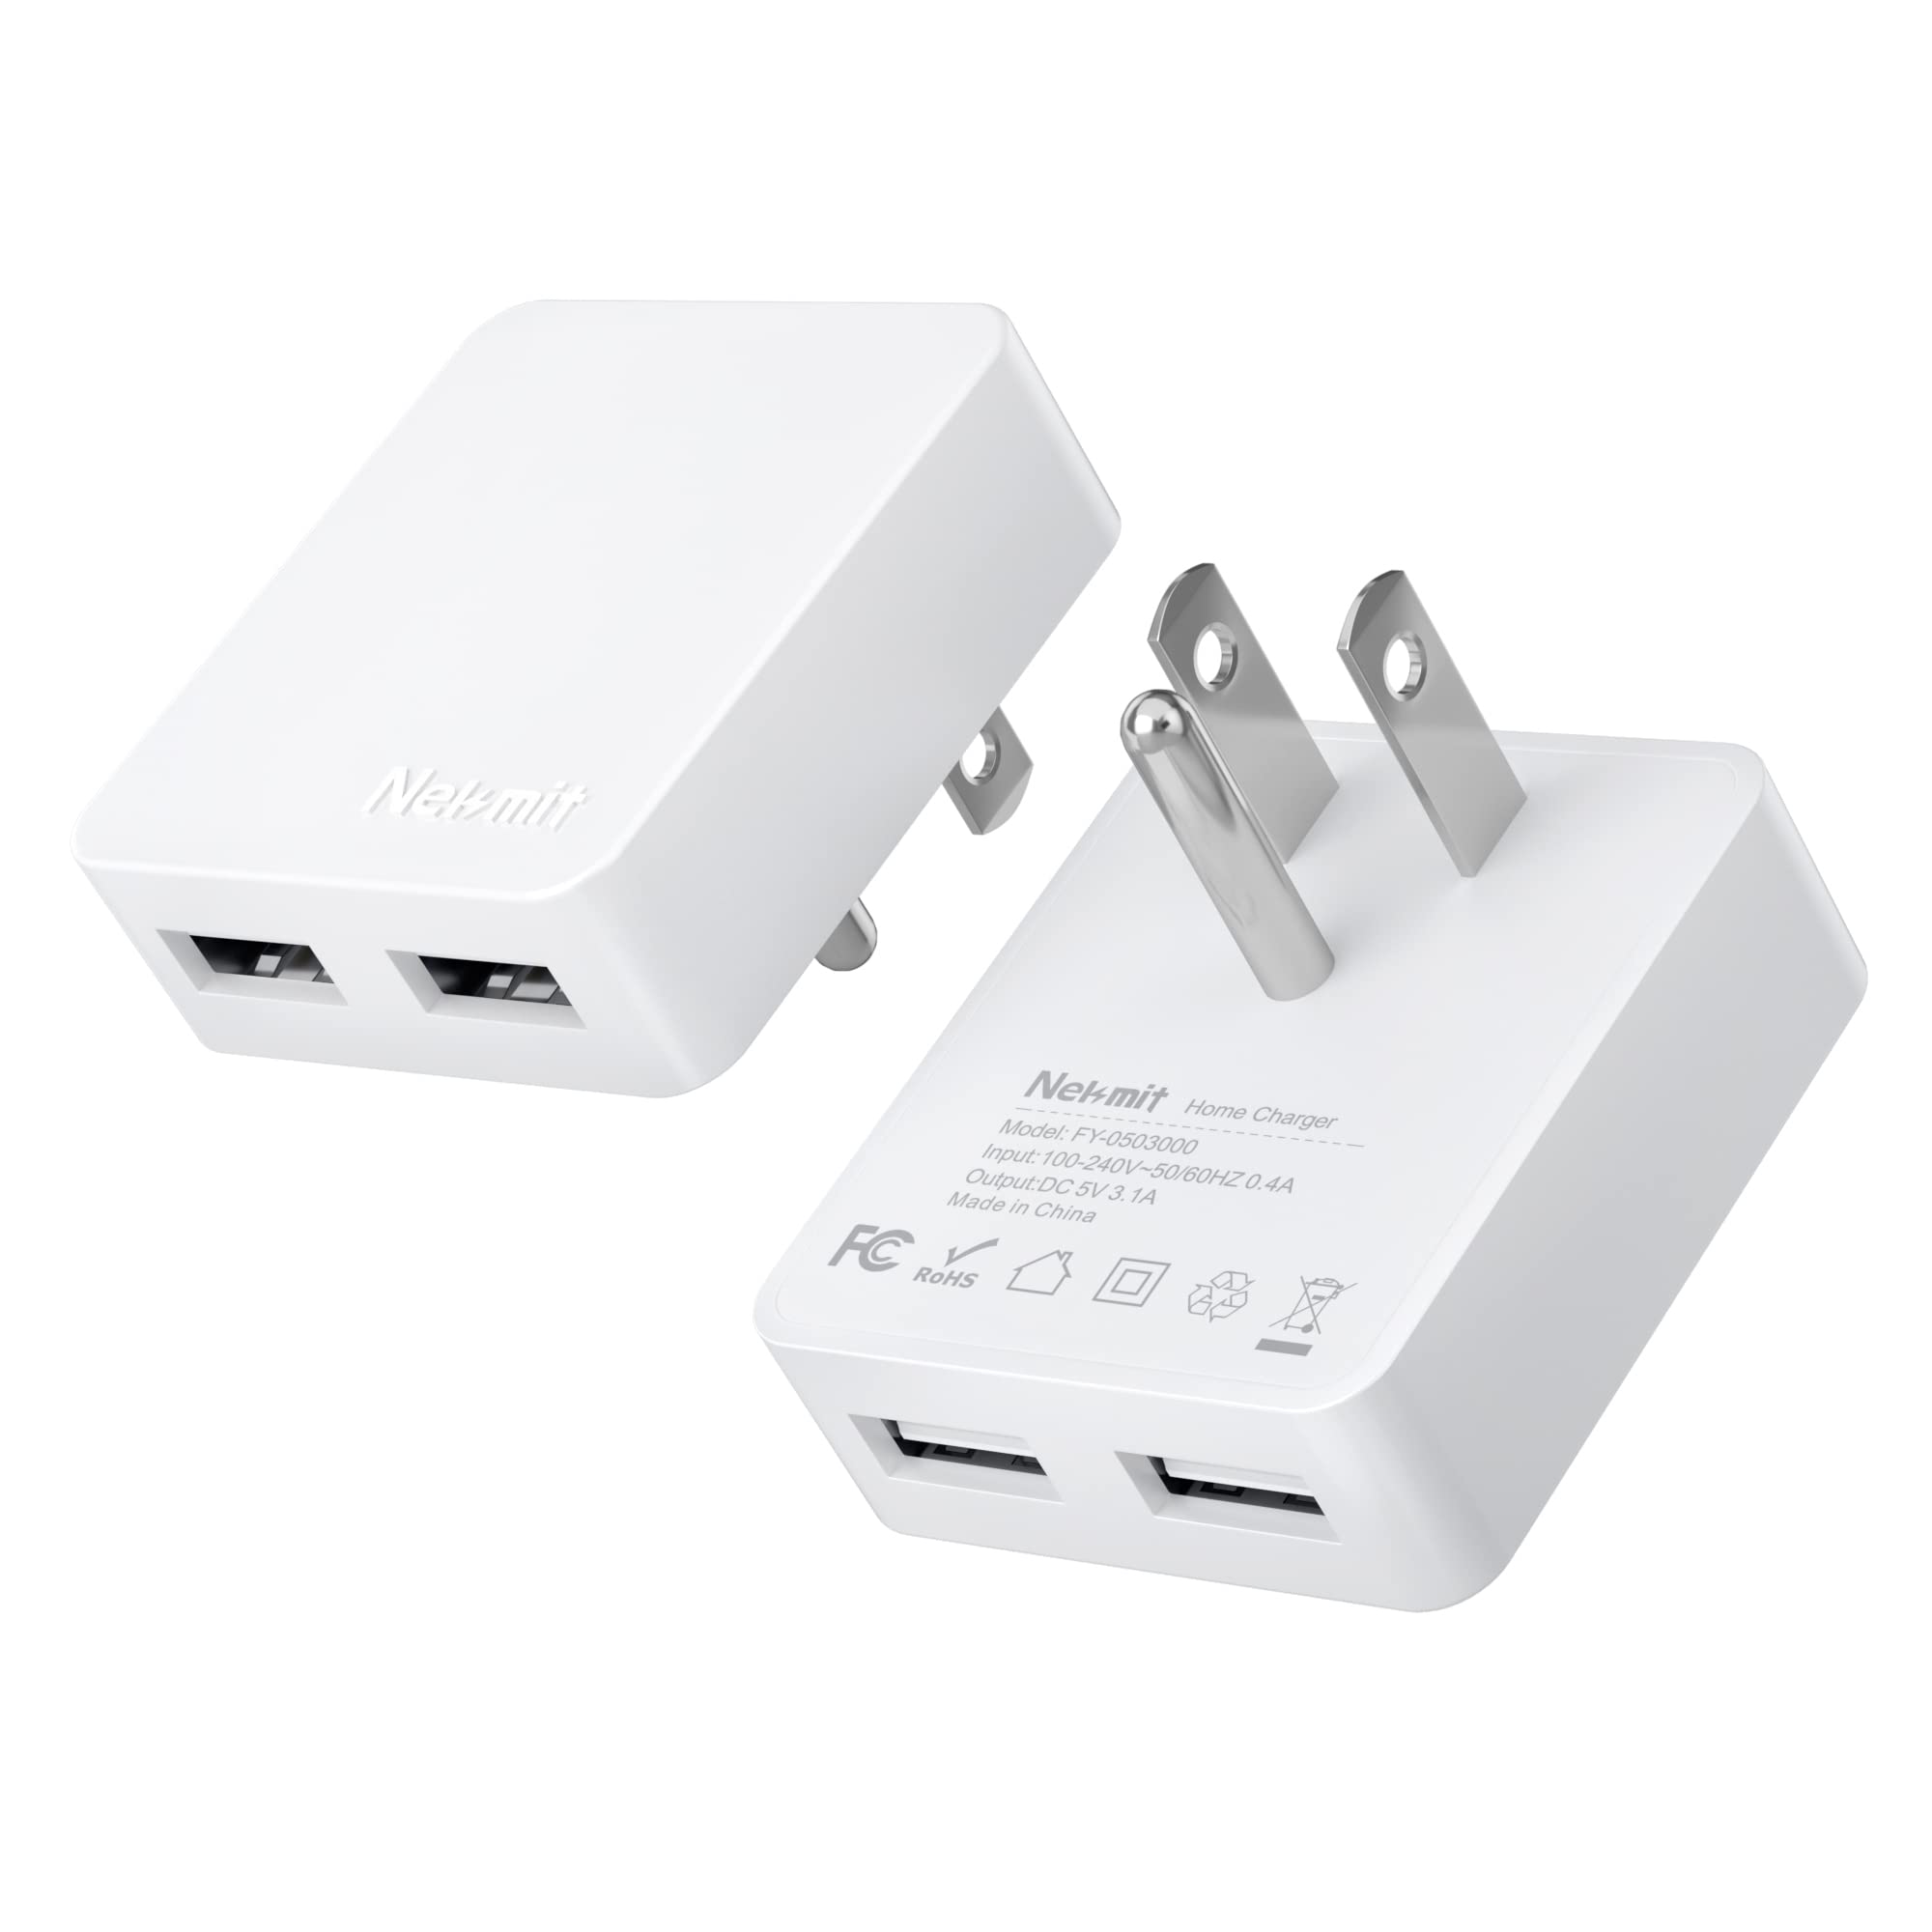 slim-wall-chargers-stay-charged-on-the-go-with-the-30w-slim-wall-charger-2-pack